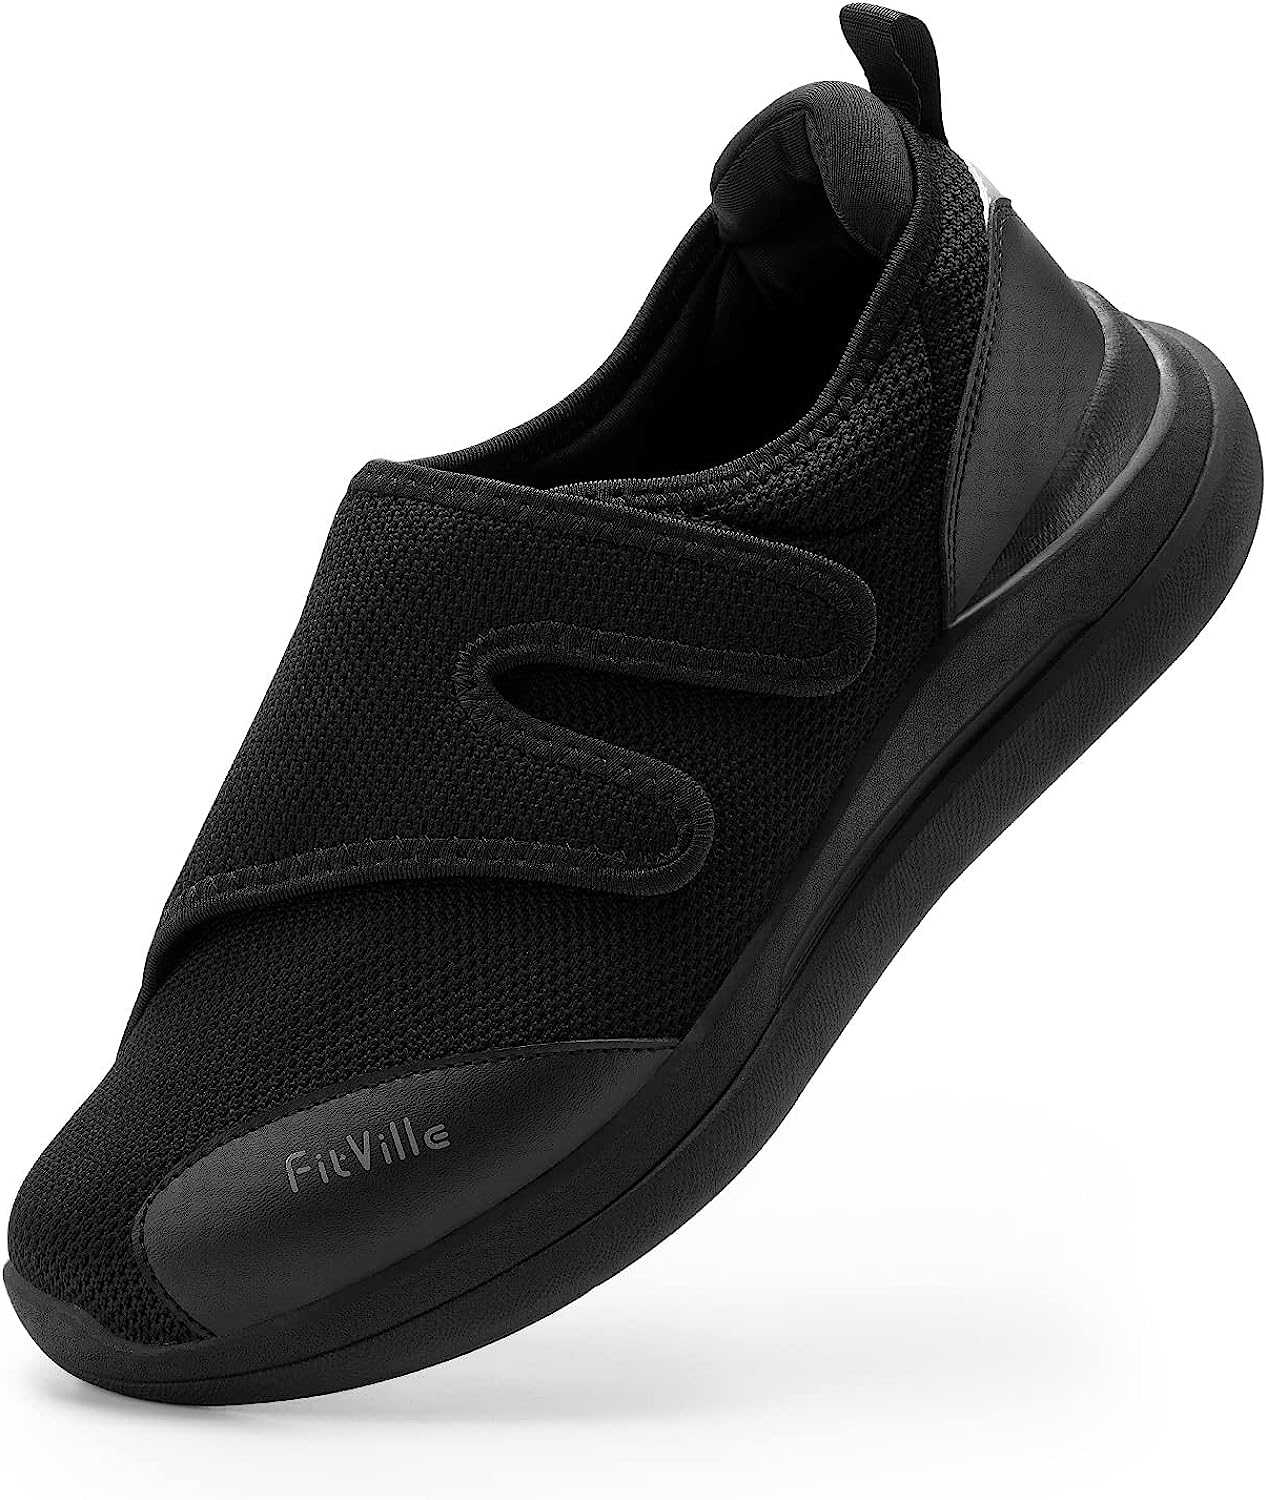 FitVille Diabetic Shoes for Men Extra Wide Width [...]